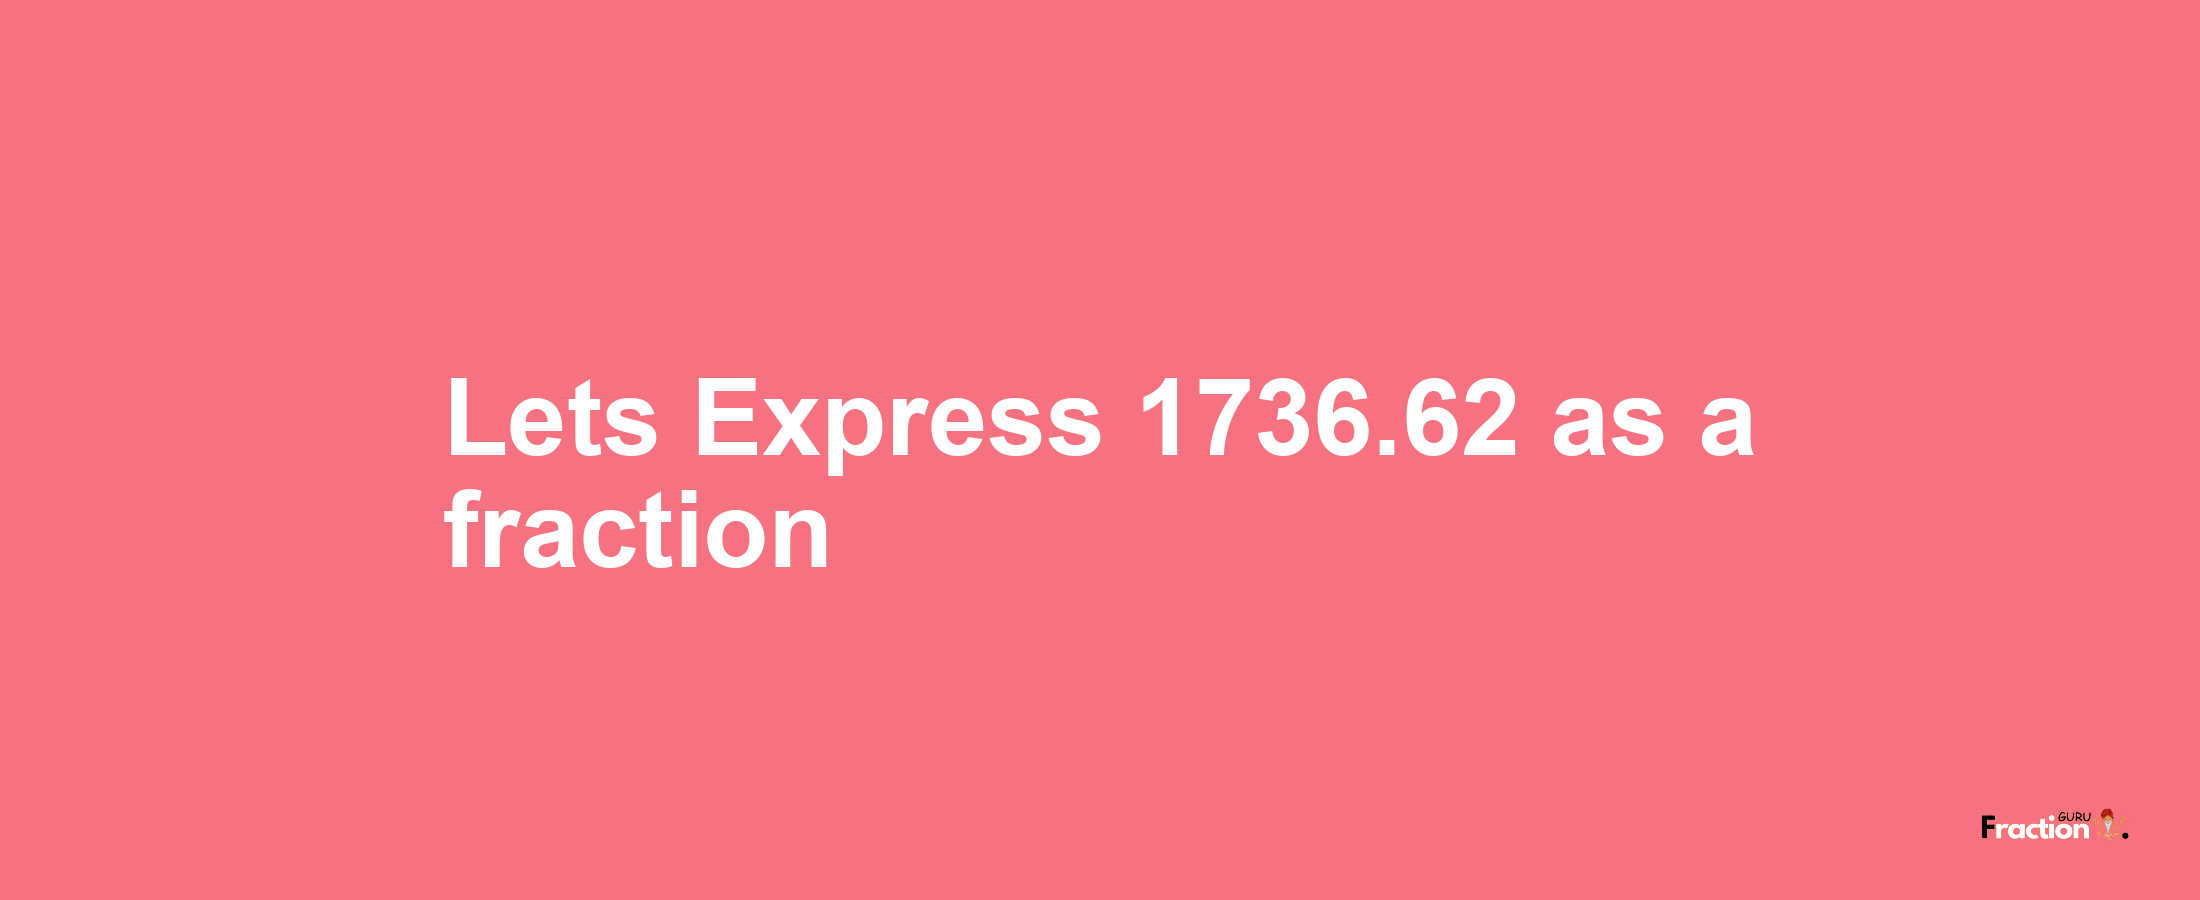 Lets Express 1736.62 as afraction